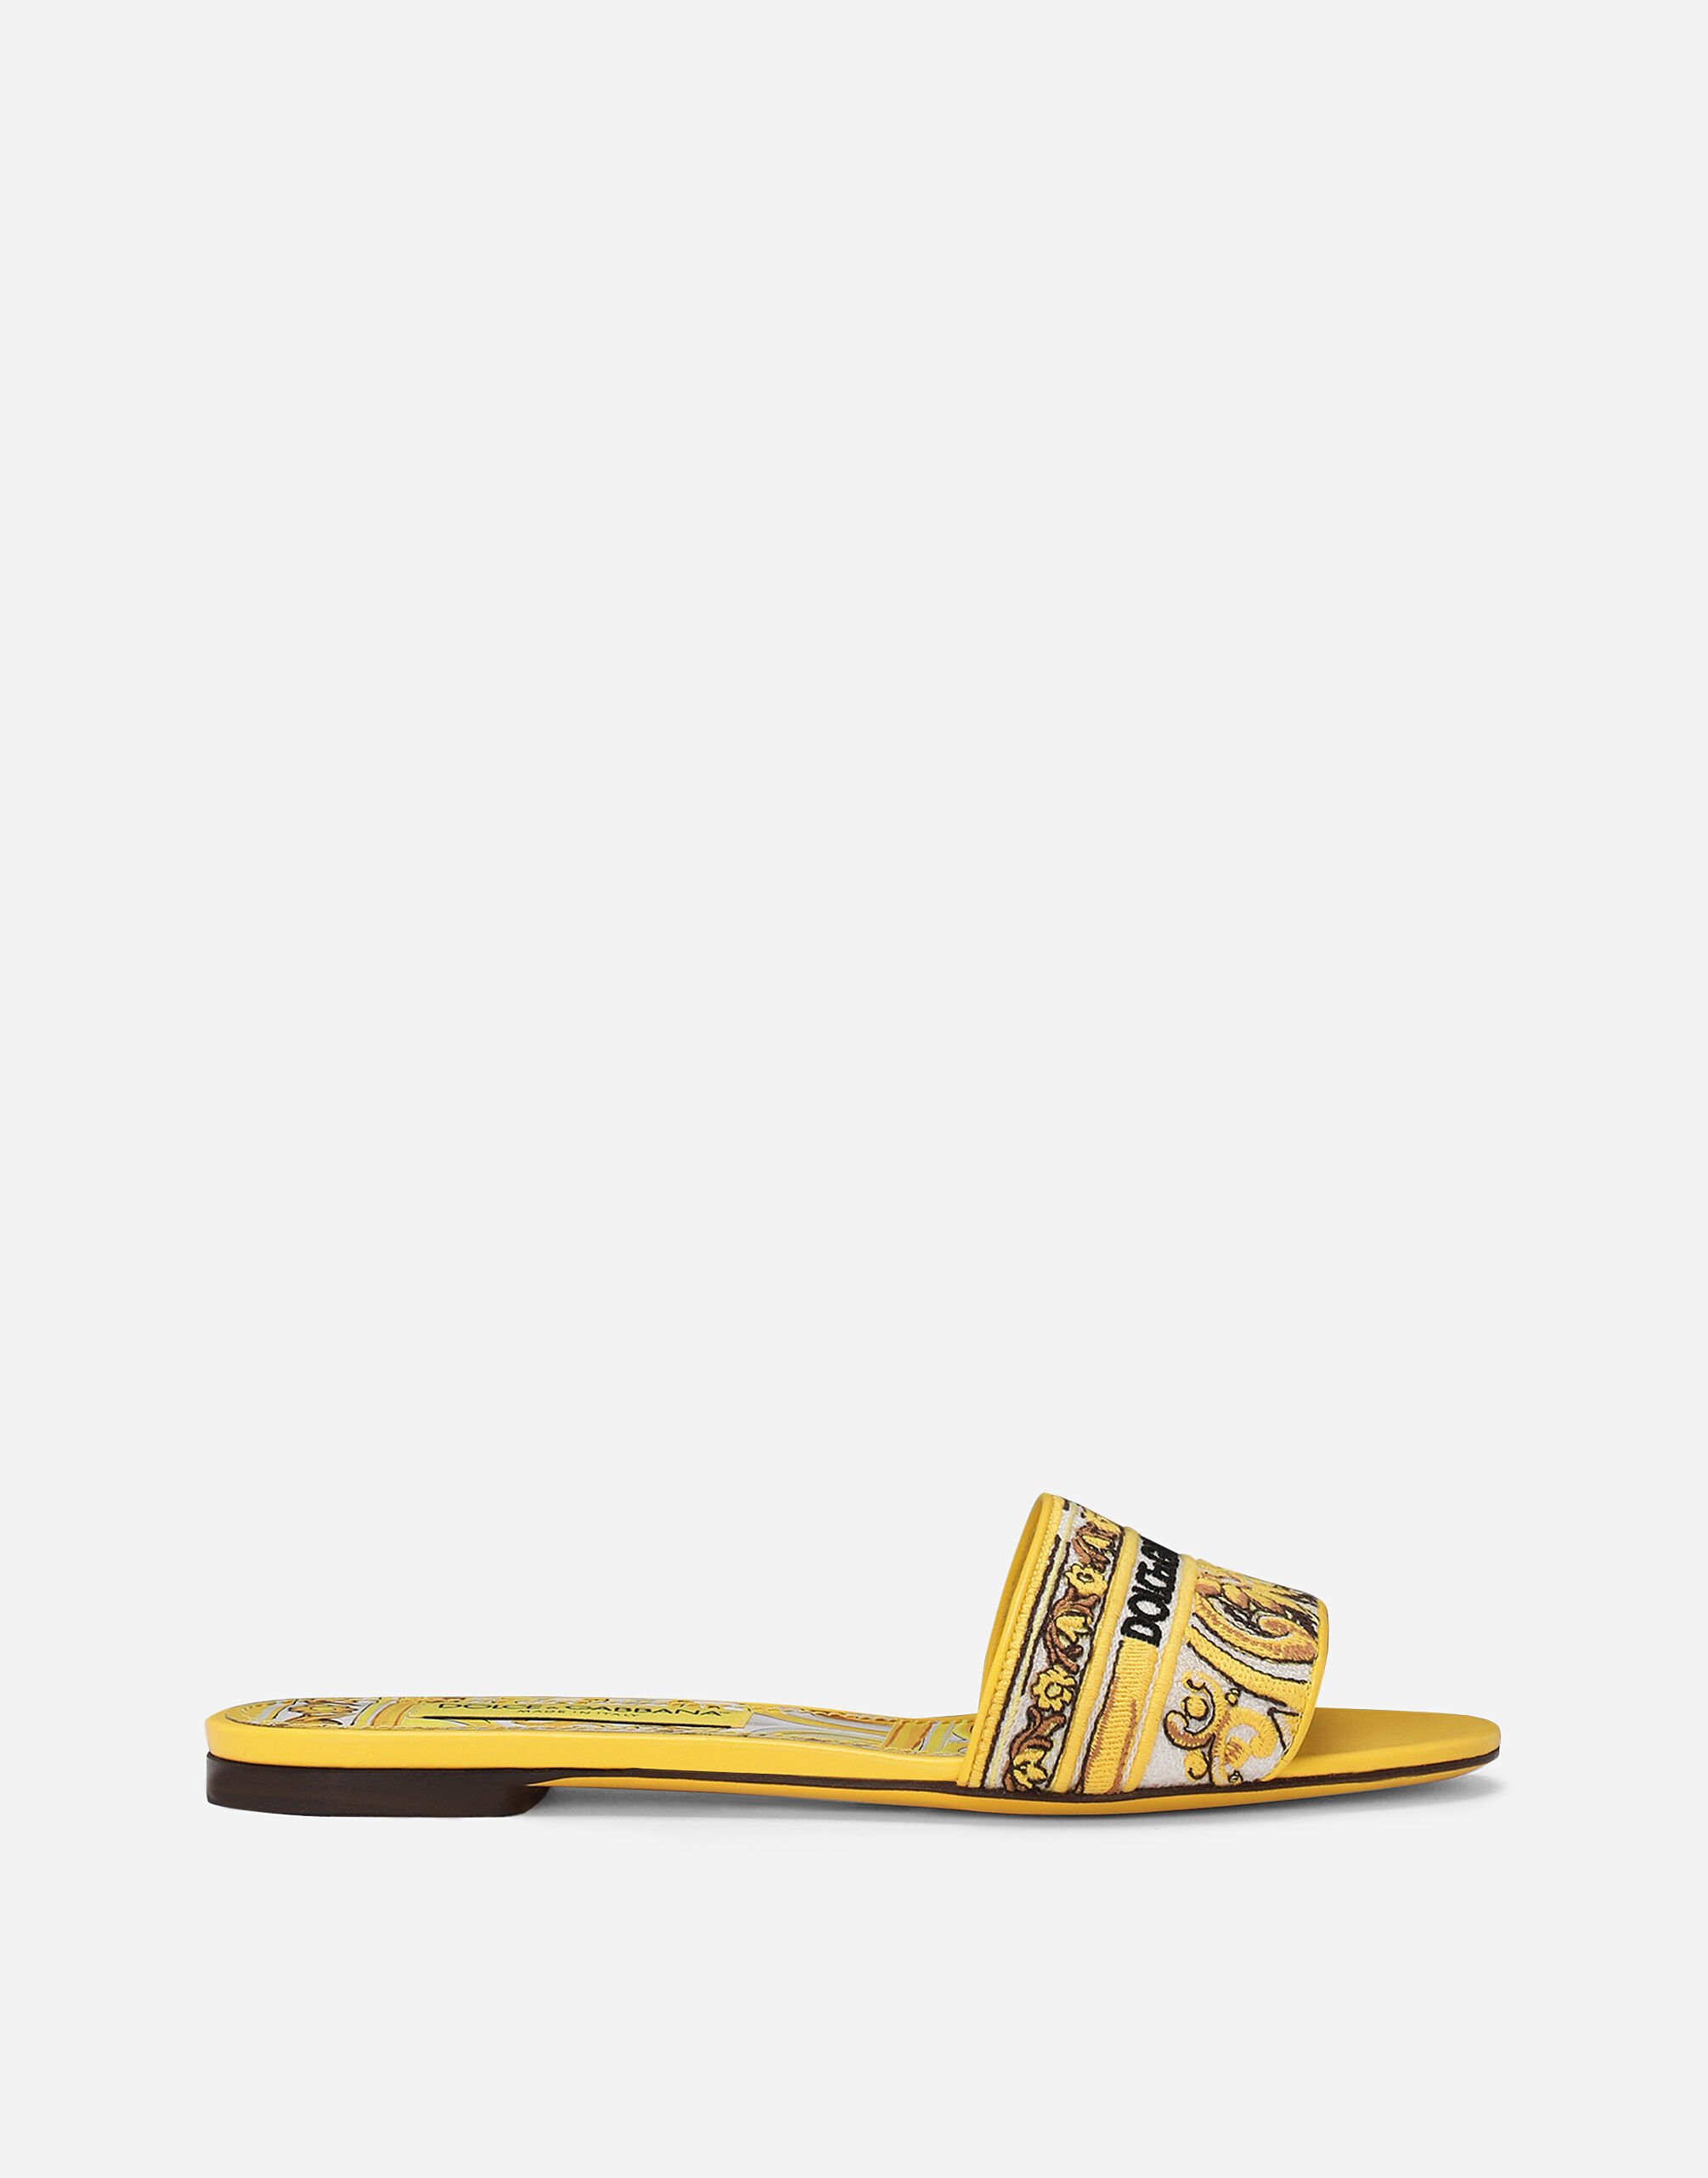 Dolce & Gabbana Sliders with embroidered majolica pattern Print FN090RGDAOZ